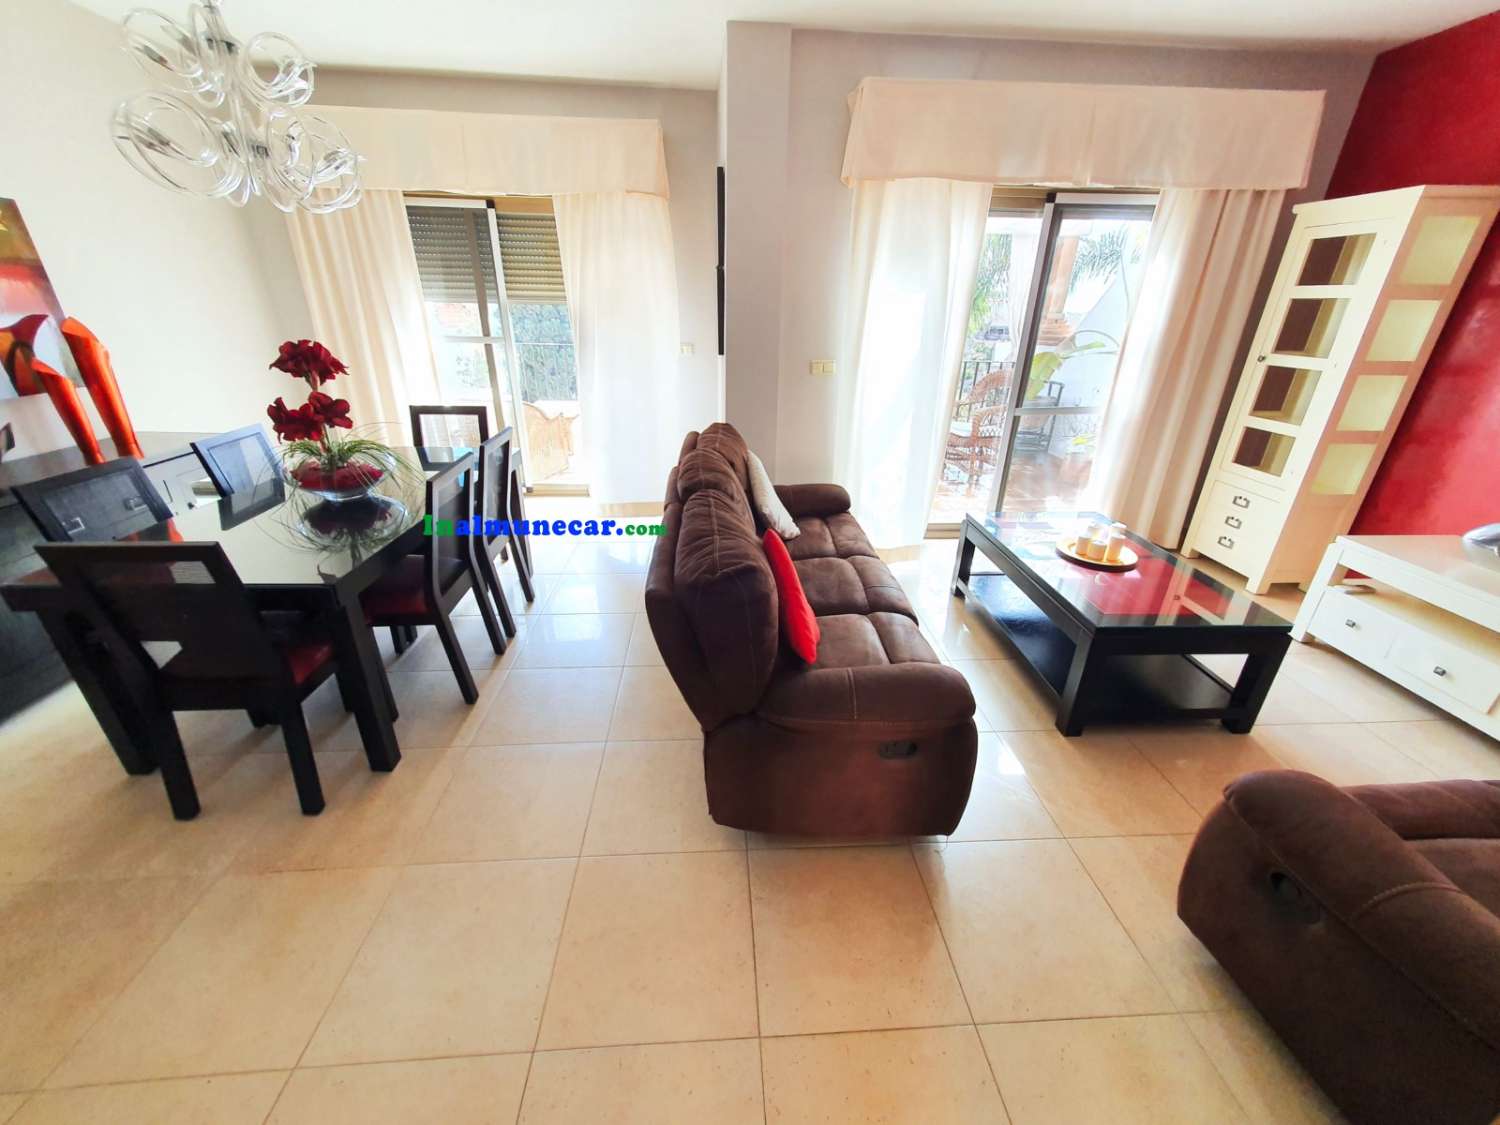 Townhouse for sale in Almuñecar, very sunny and bright and with private pool.